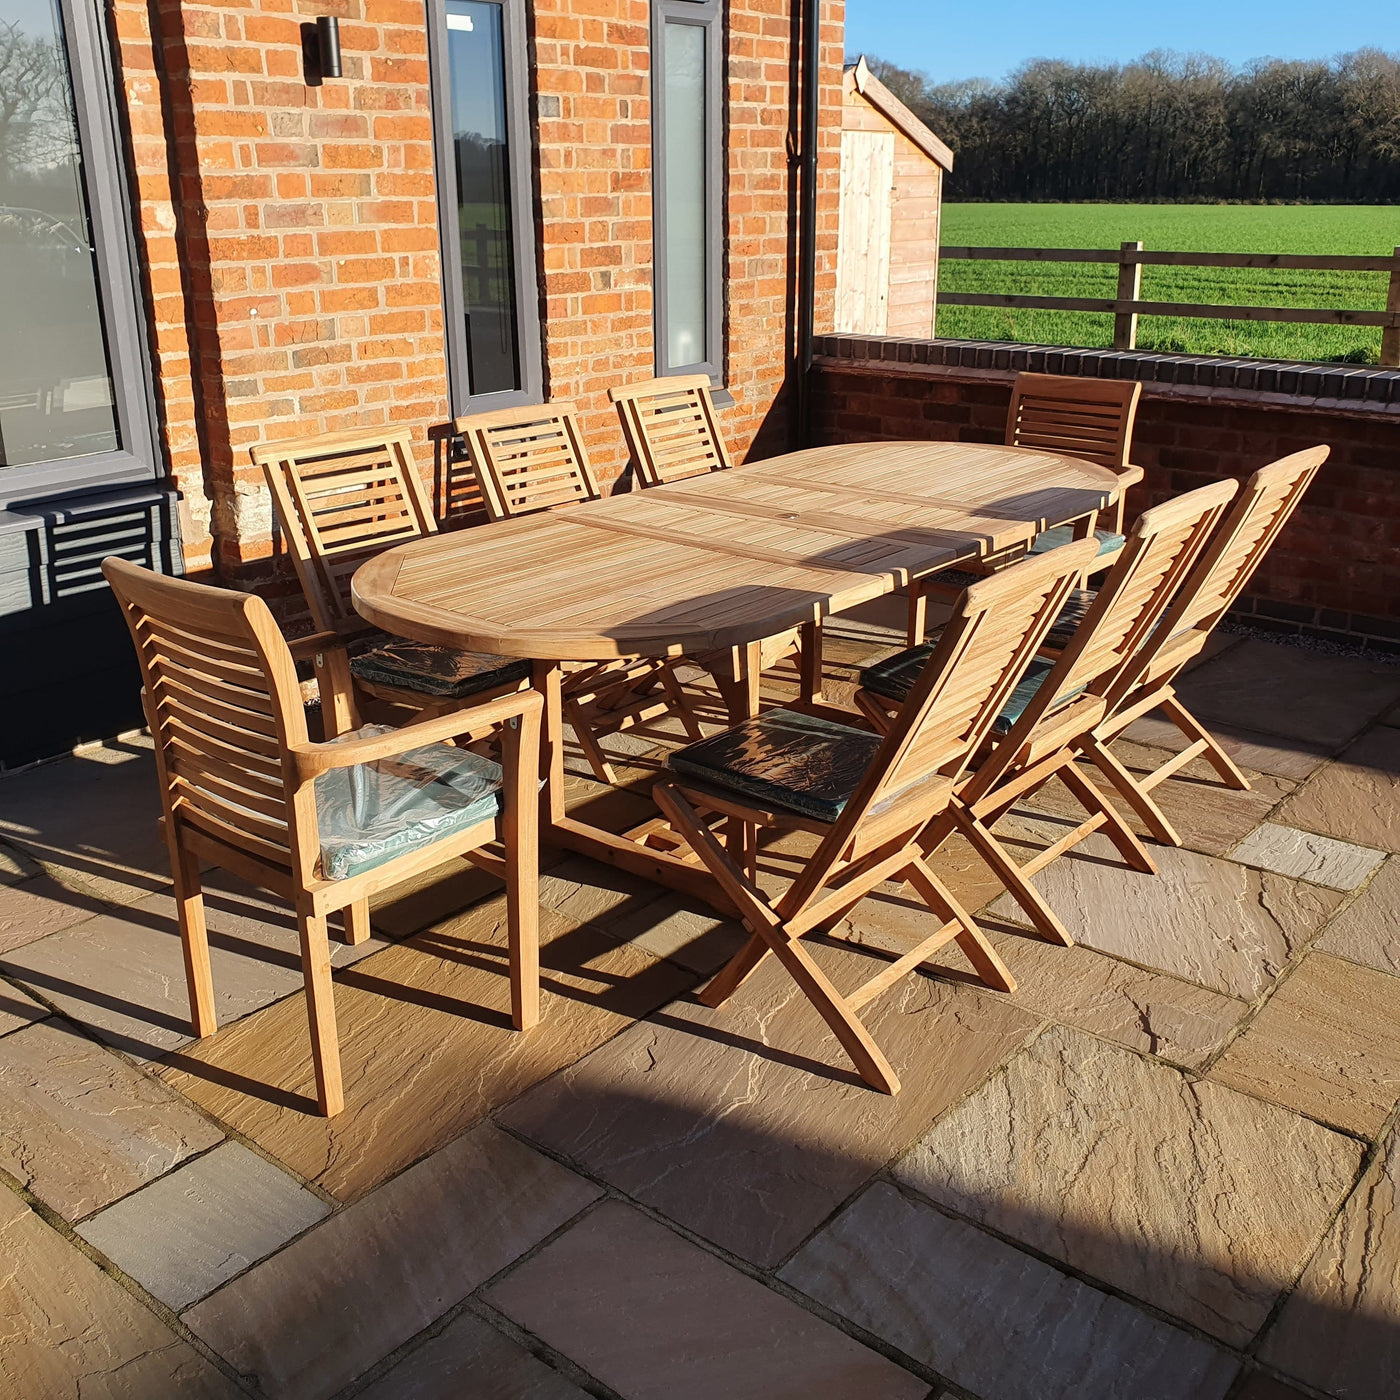 Teak Garden Furniture Set Extending Oval Table 180-240 cm (6 Folding & 2 Stacking Chairs ) Complete set Cushions Included - Royal finesse